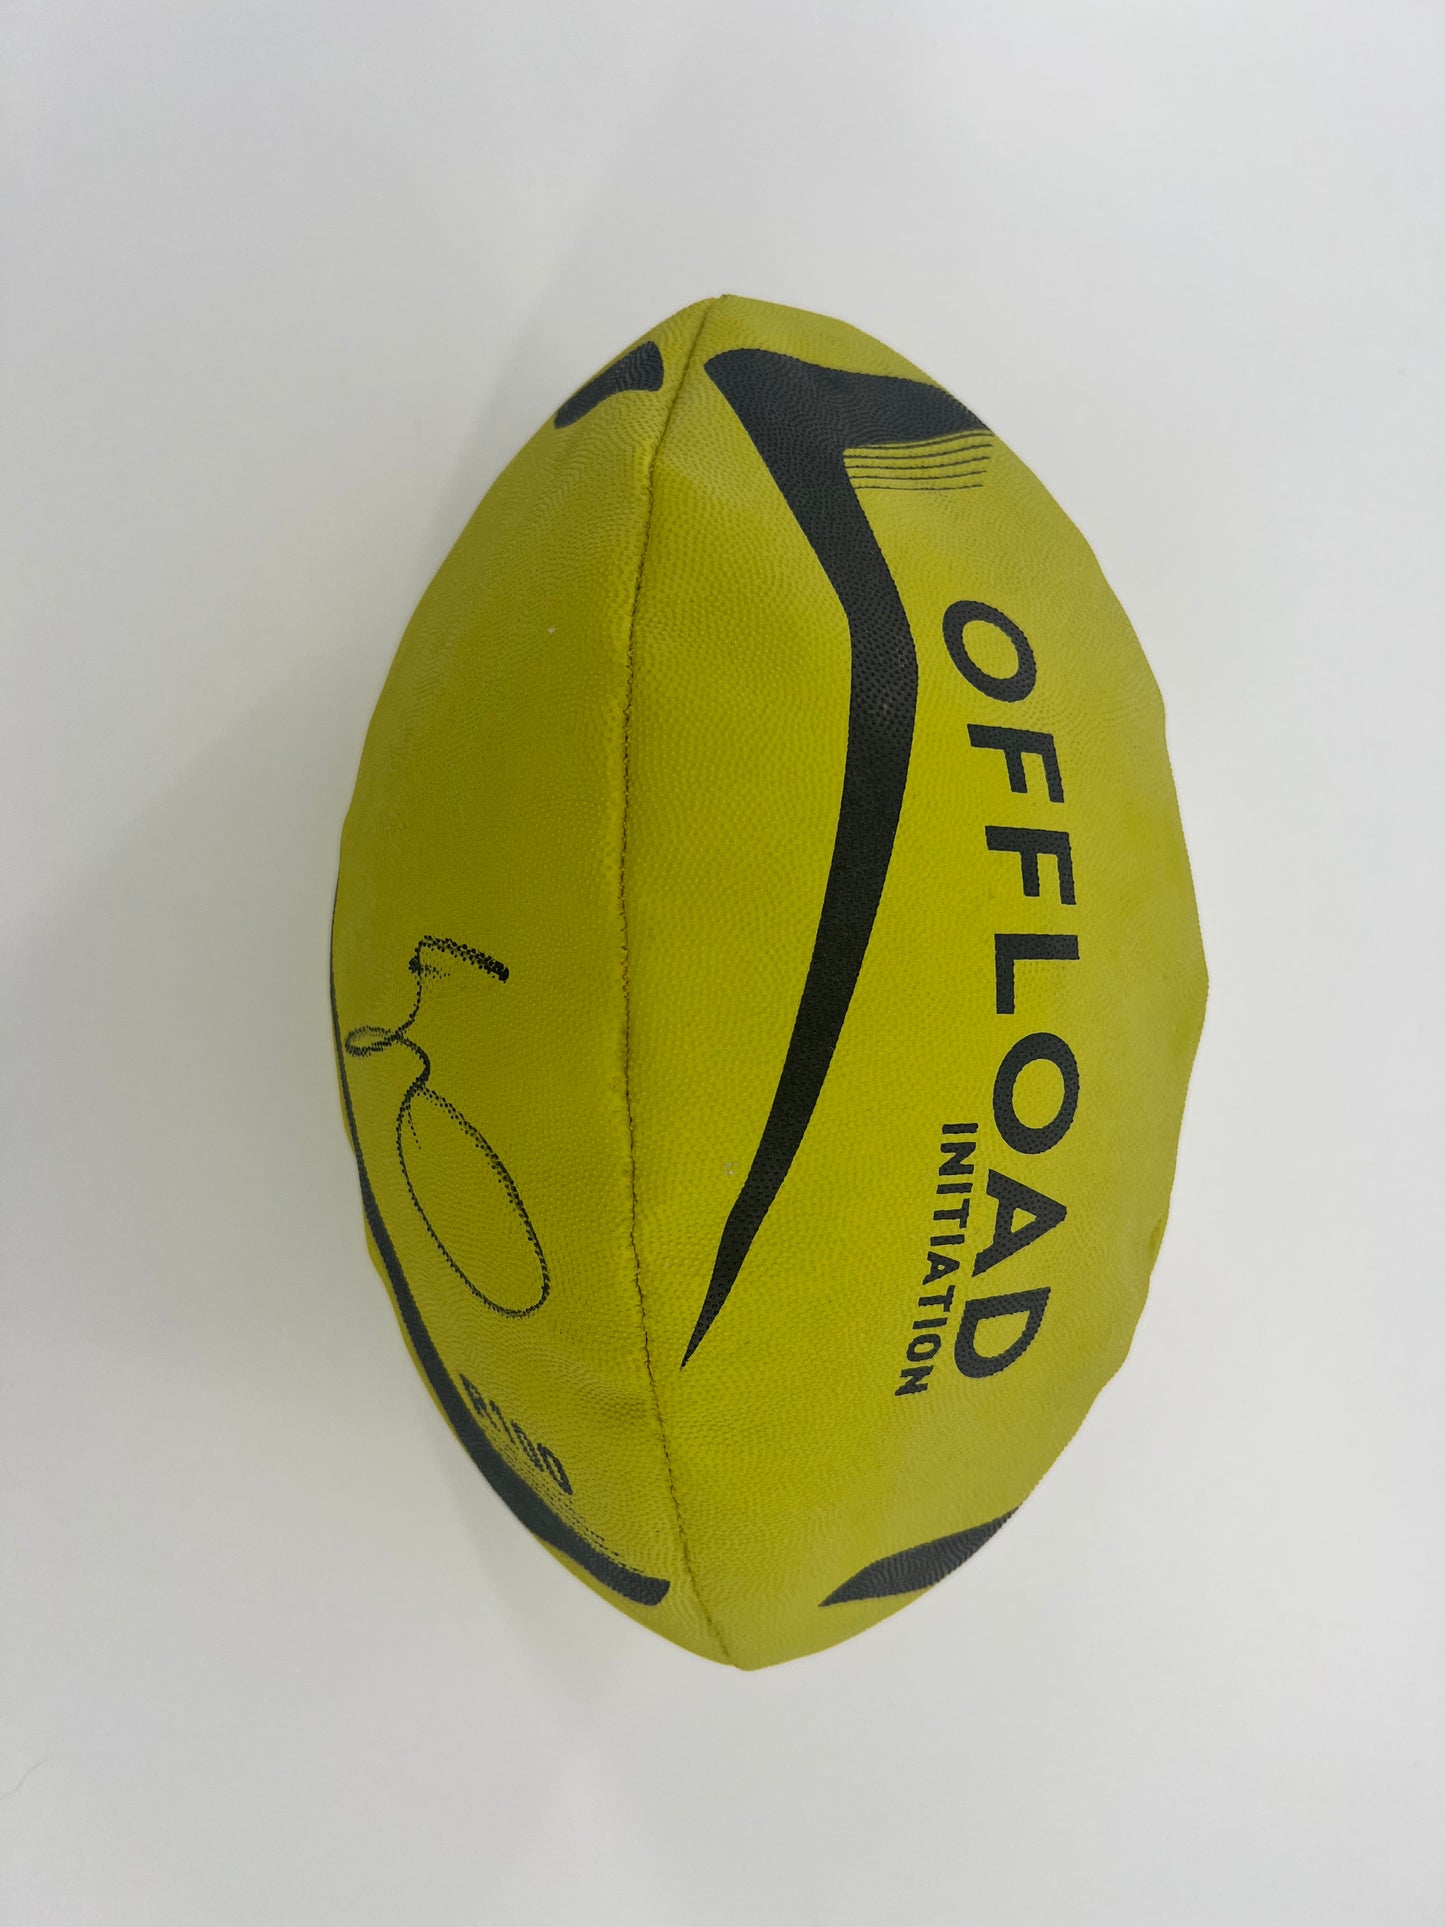 Sonny Bill Williams Signed Rugby Ball